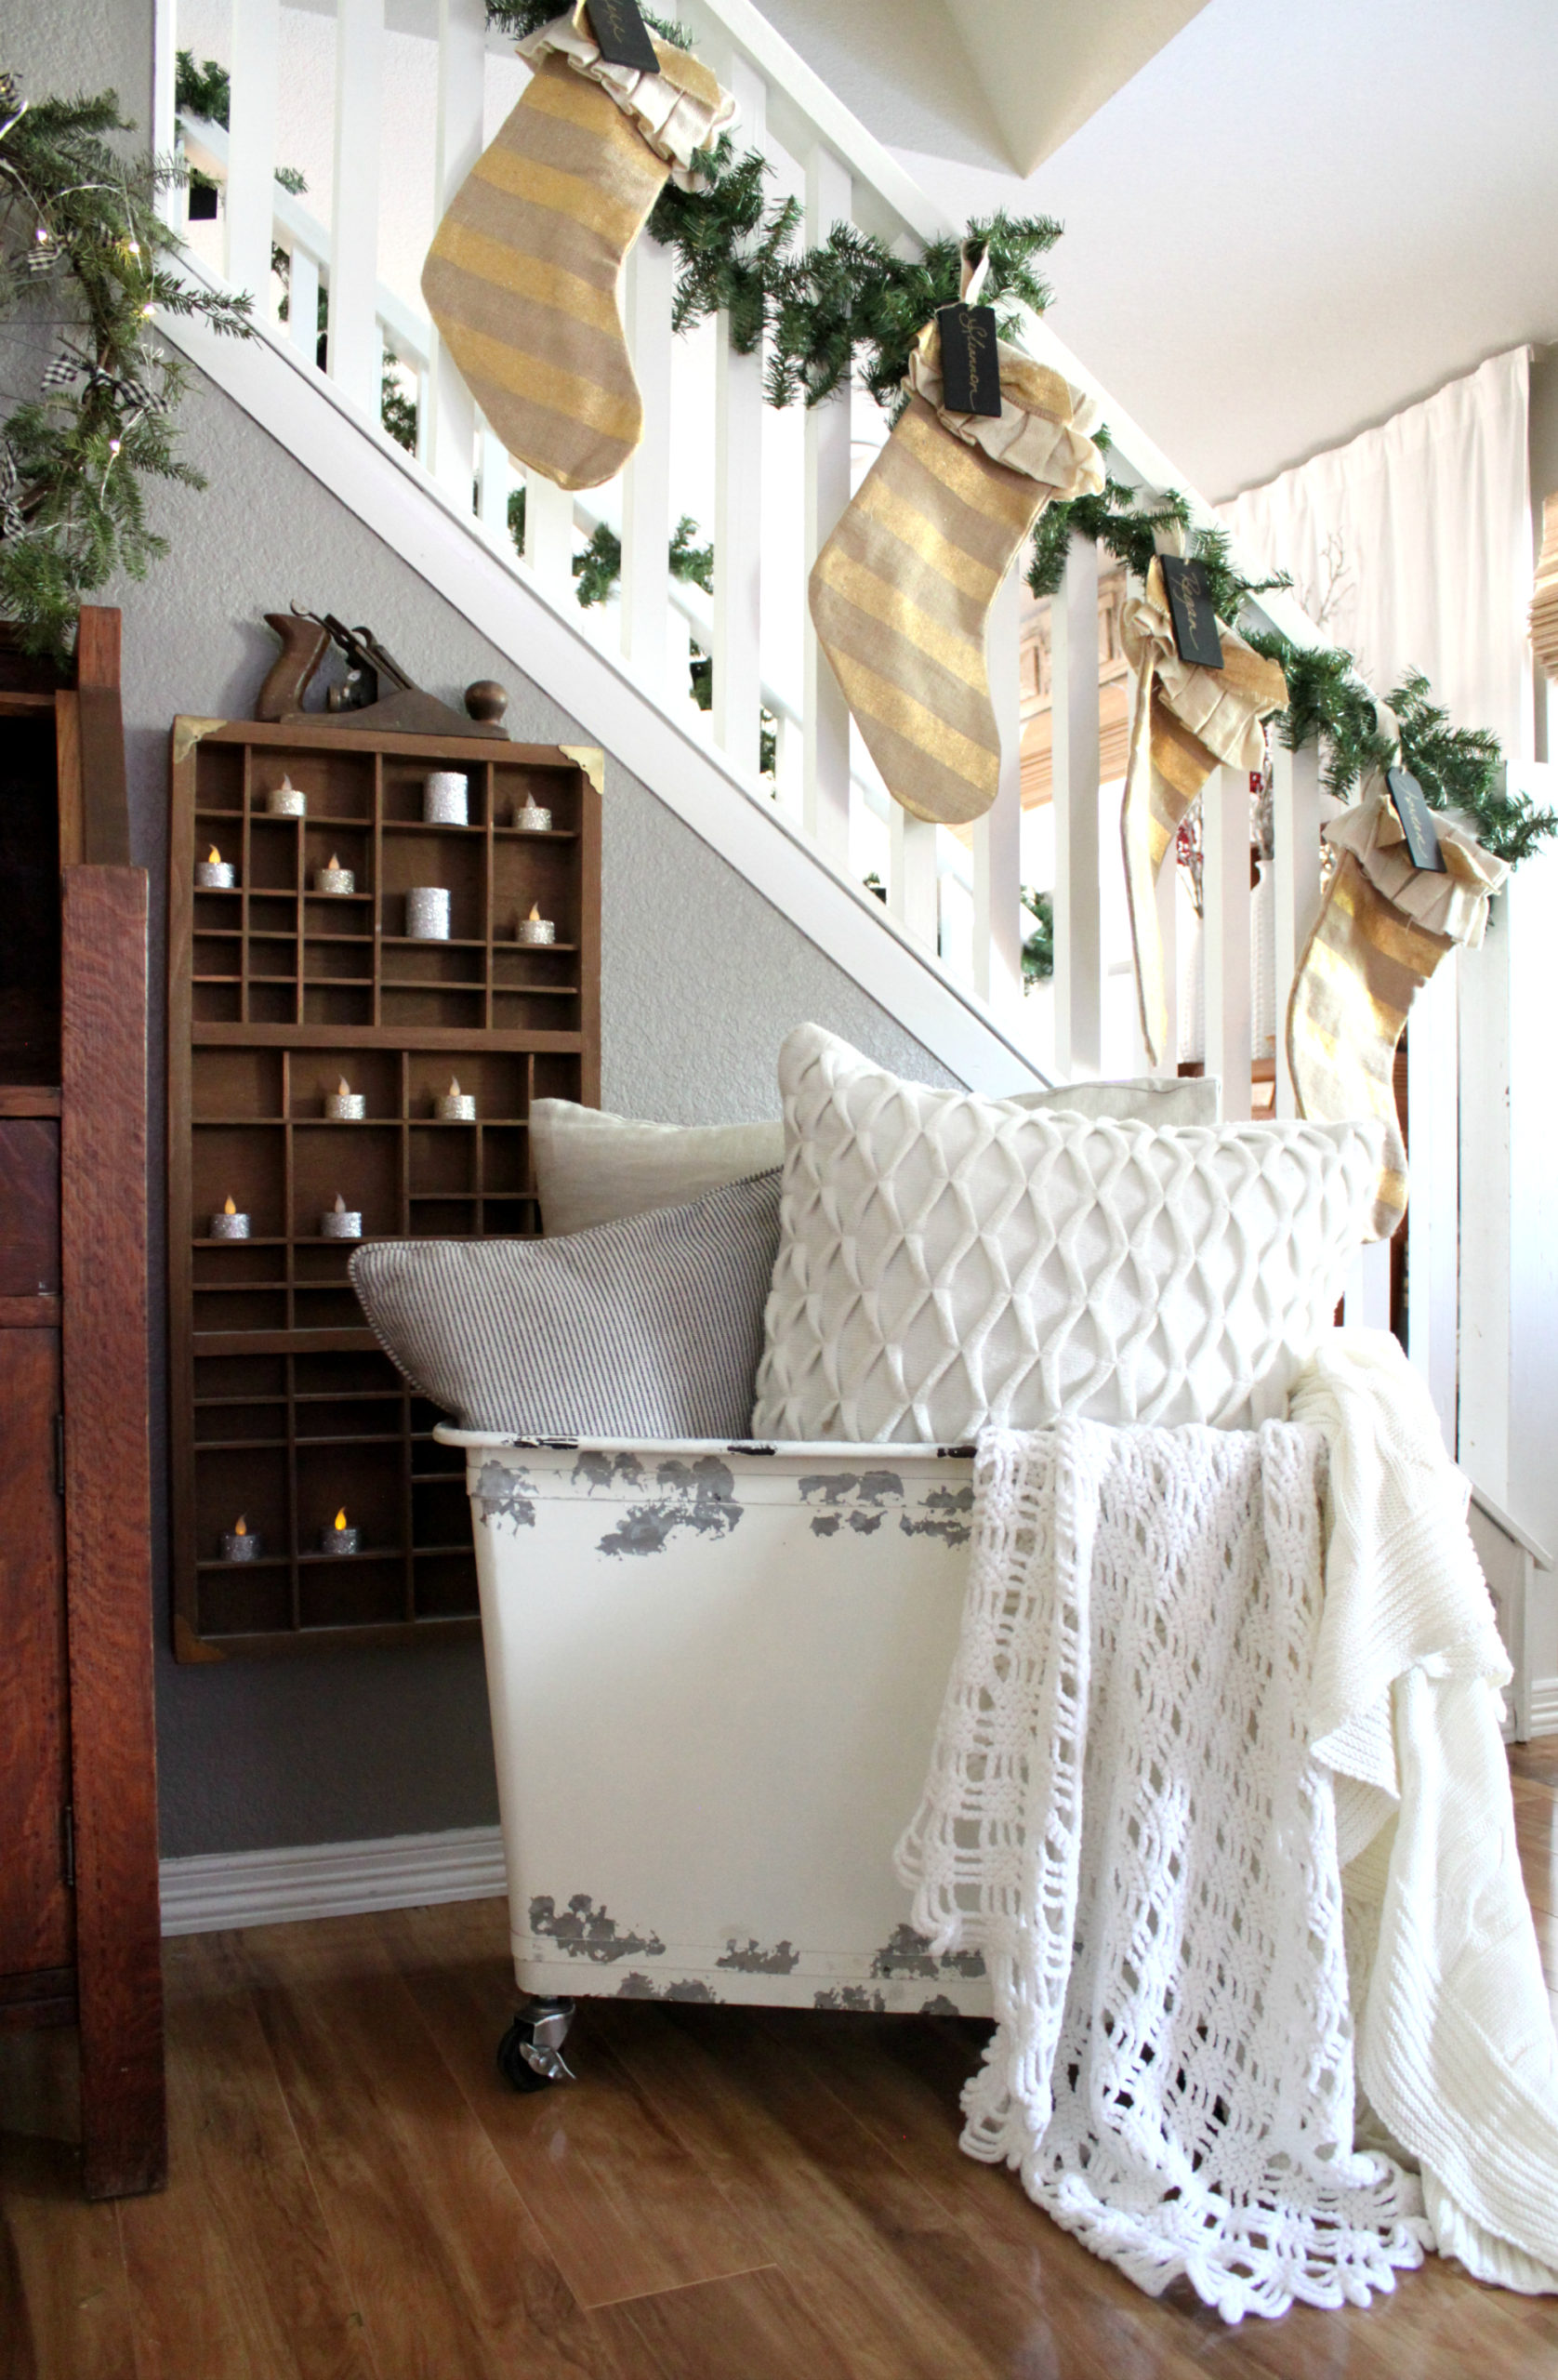 A Country Christmas with Cracker Barrel Old Country Store | An Inspired Nest